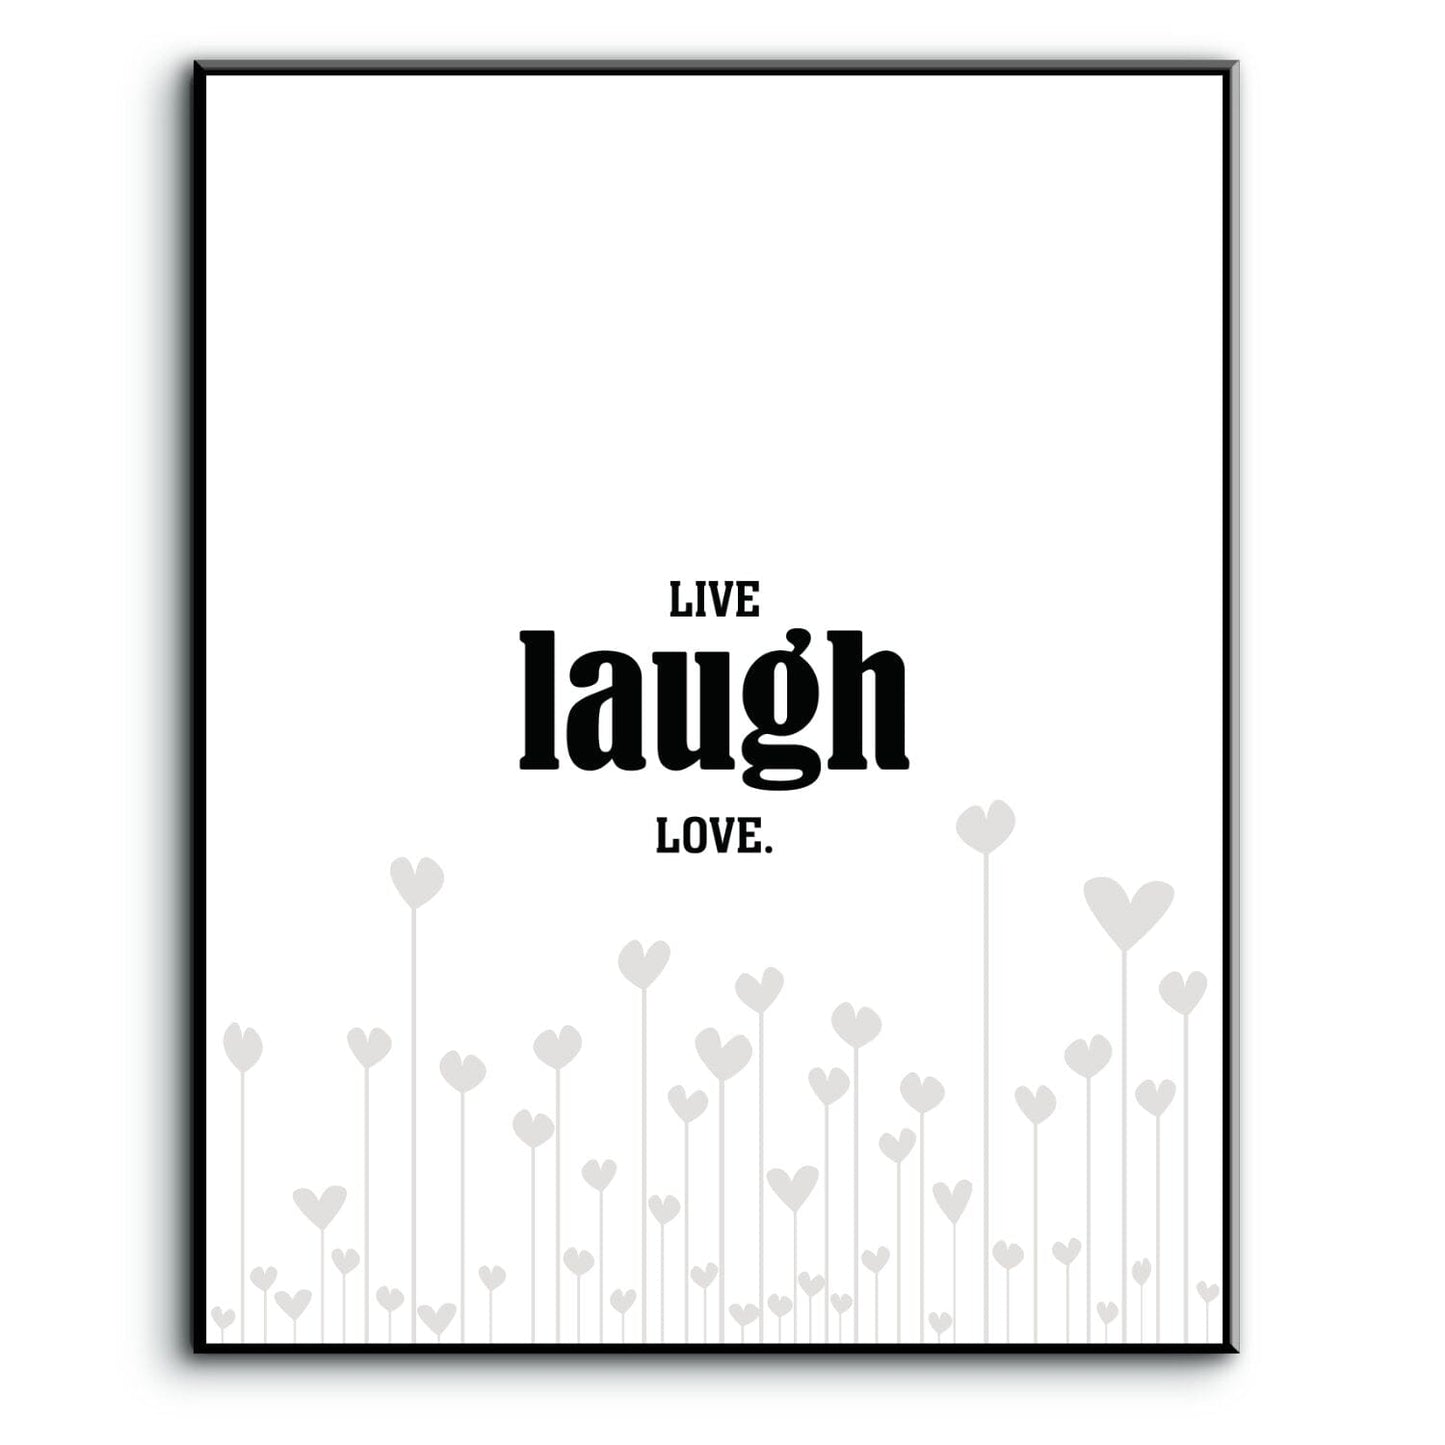 Light-Hearted Wall Art - Live Laugh Love - Wise and Witty Wise and Wiseass Quotes Song Lyrics Art 8x10 Plaque Mount 